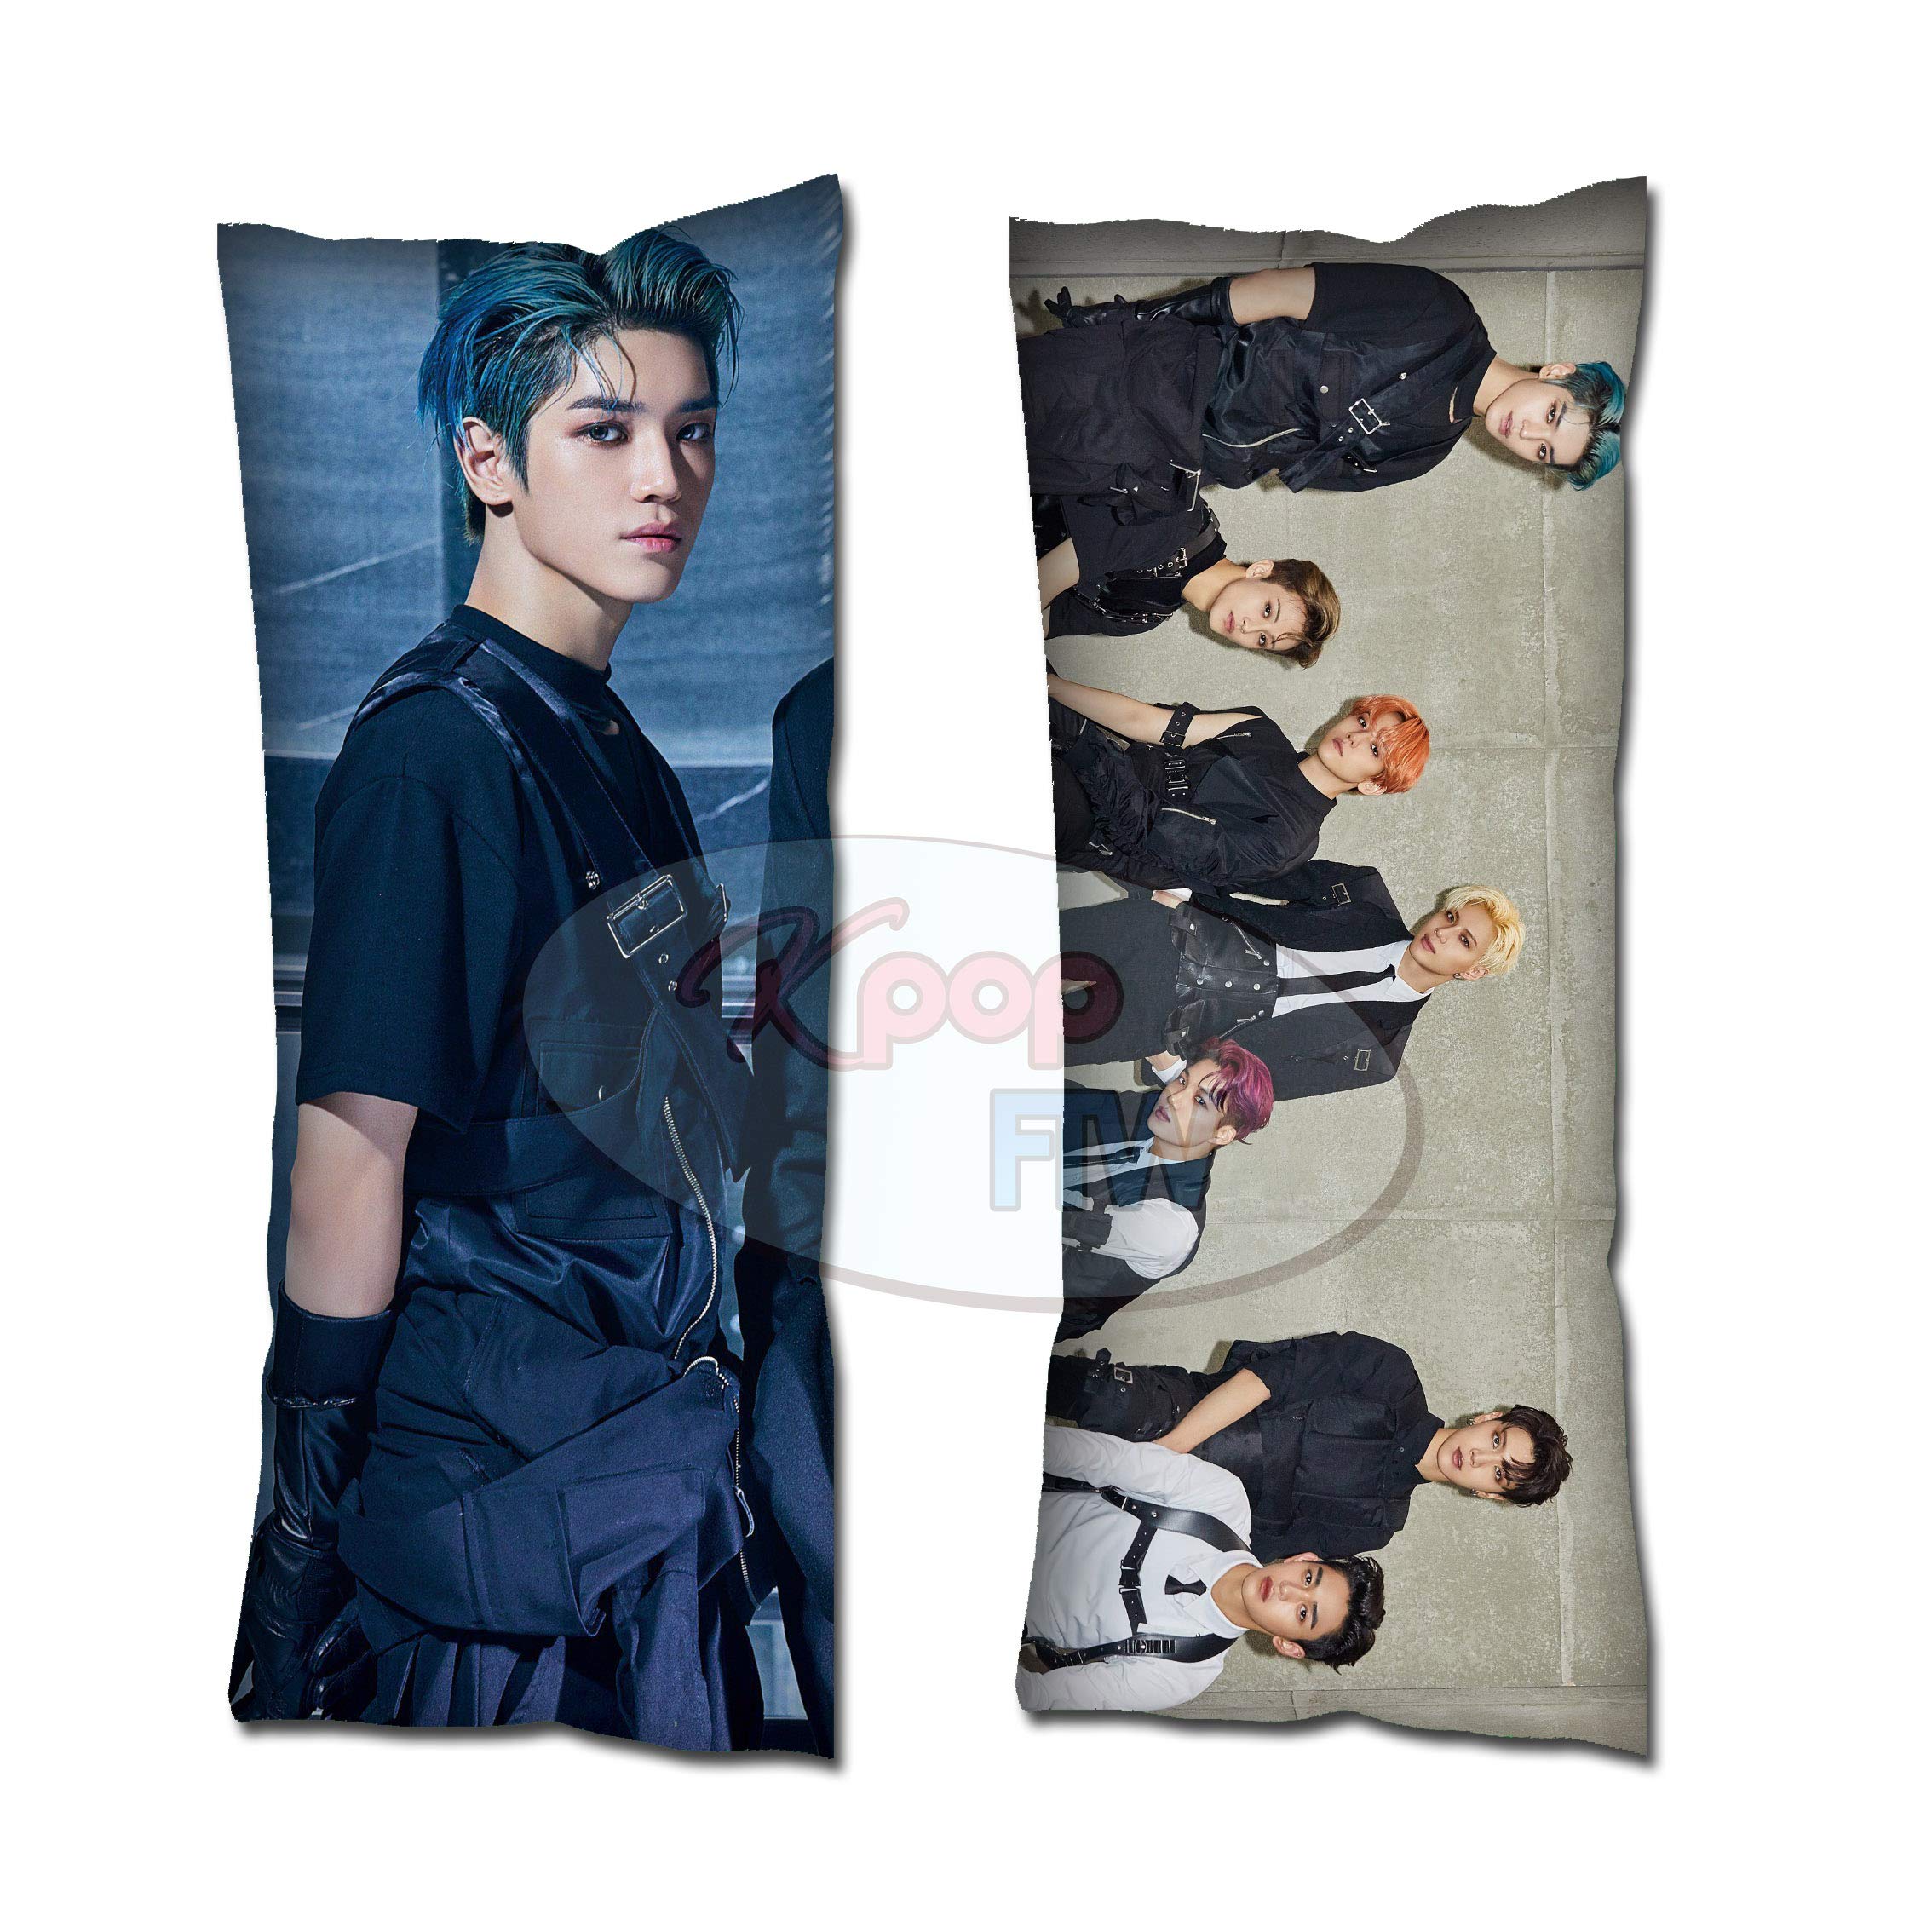 Cosplay-FTW Kpop Super M Taeyong Body Pillow Peach Skin Cotton Polyester Blend 40cm x 100cm (Set of 1, CASE ONLY)